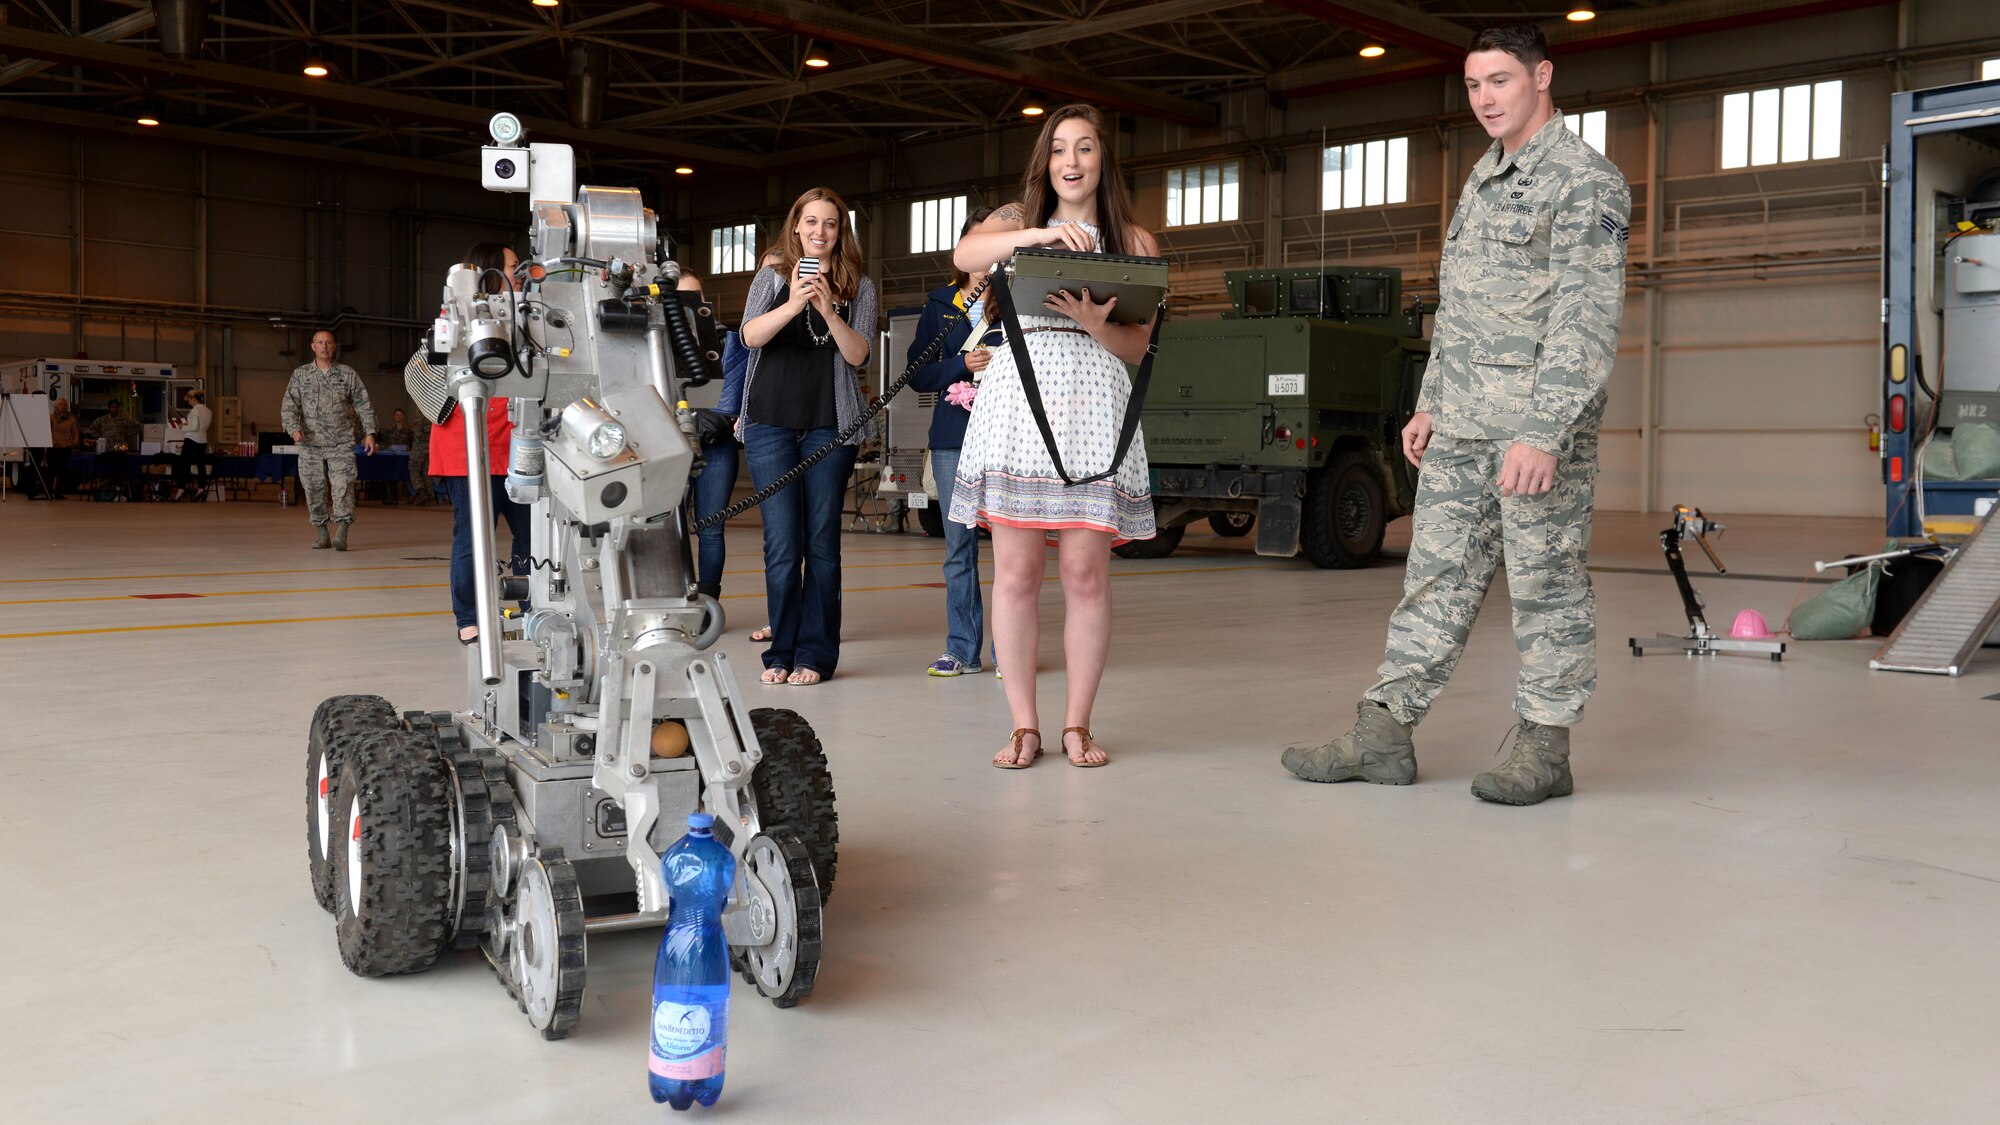 Edin Gutierrez controls an explosive ordnance disposal robot during the first wing-led Spouses Appreciation Day tour, May 10, 2016, at Aviano Air Base, Italy. Spouses participated in hands-on activities to better understand the 31st Fighter Wing’s mission. (U.S. Air Force photo by Airman 1st Class Cary Smith/Released)